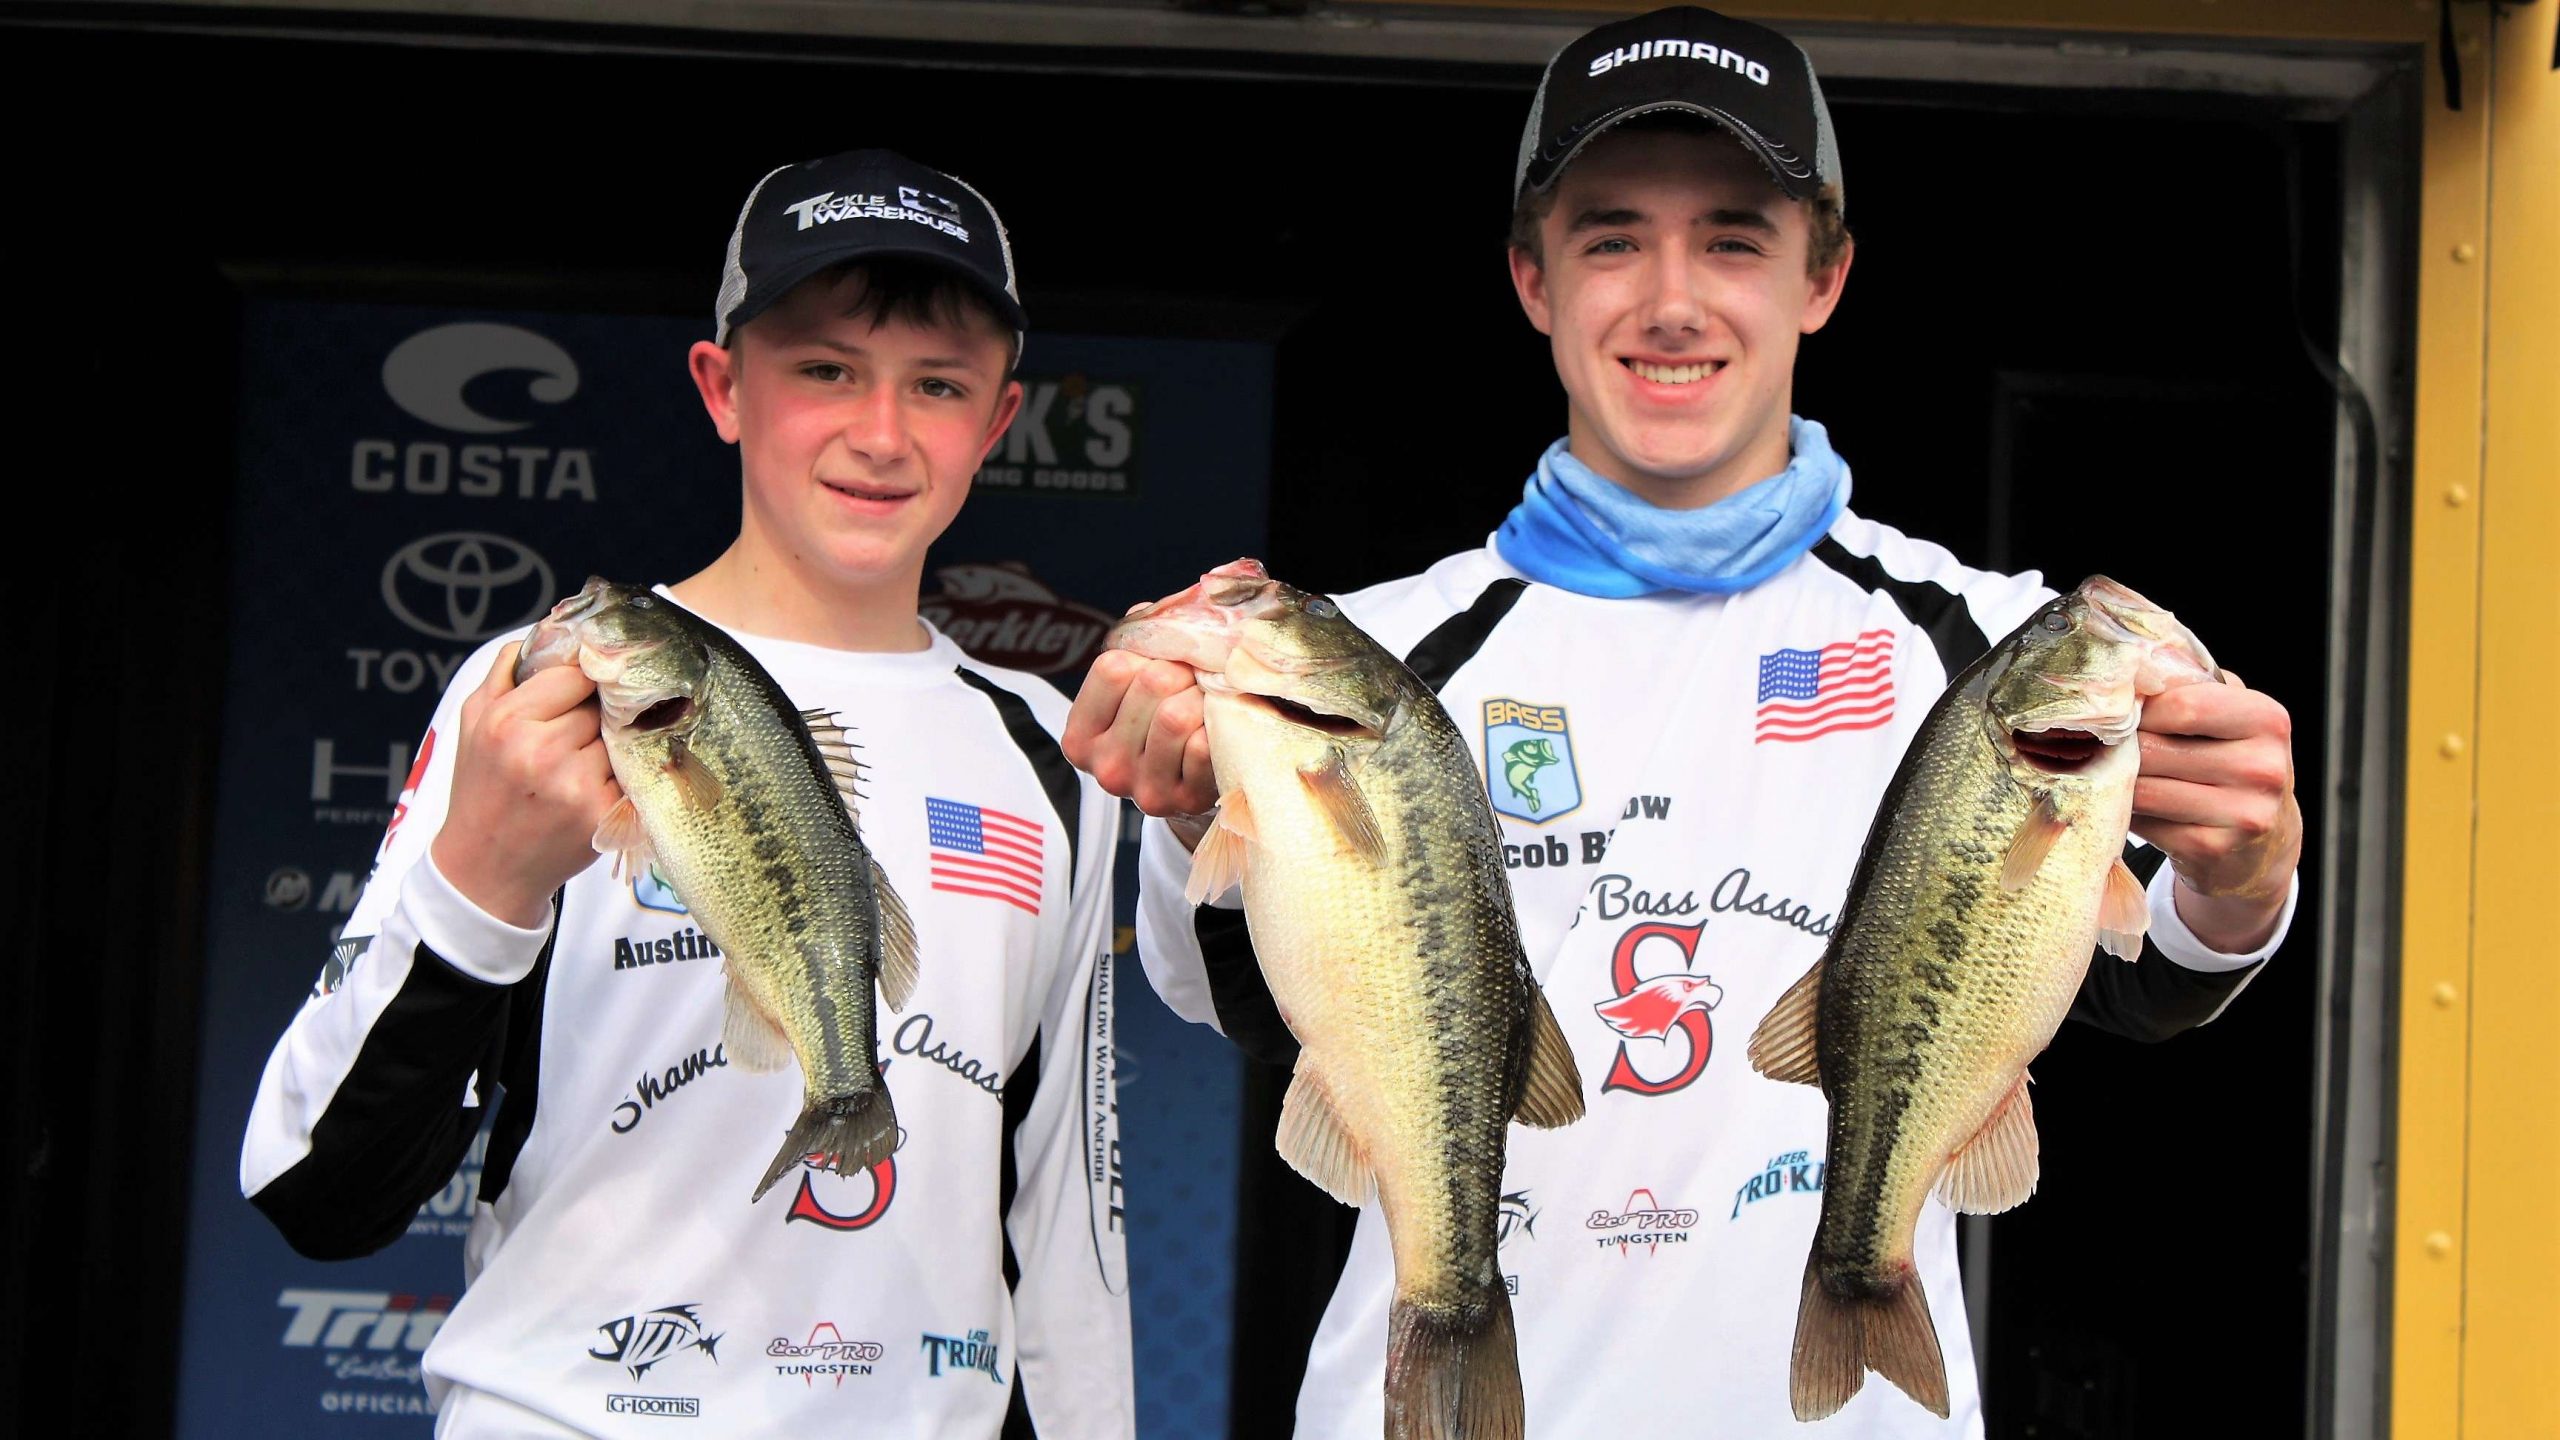 Brad Boswell and Zack Conrad of Center Grove (Ind.) High placed 12th with 10-12.
